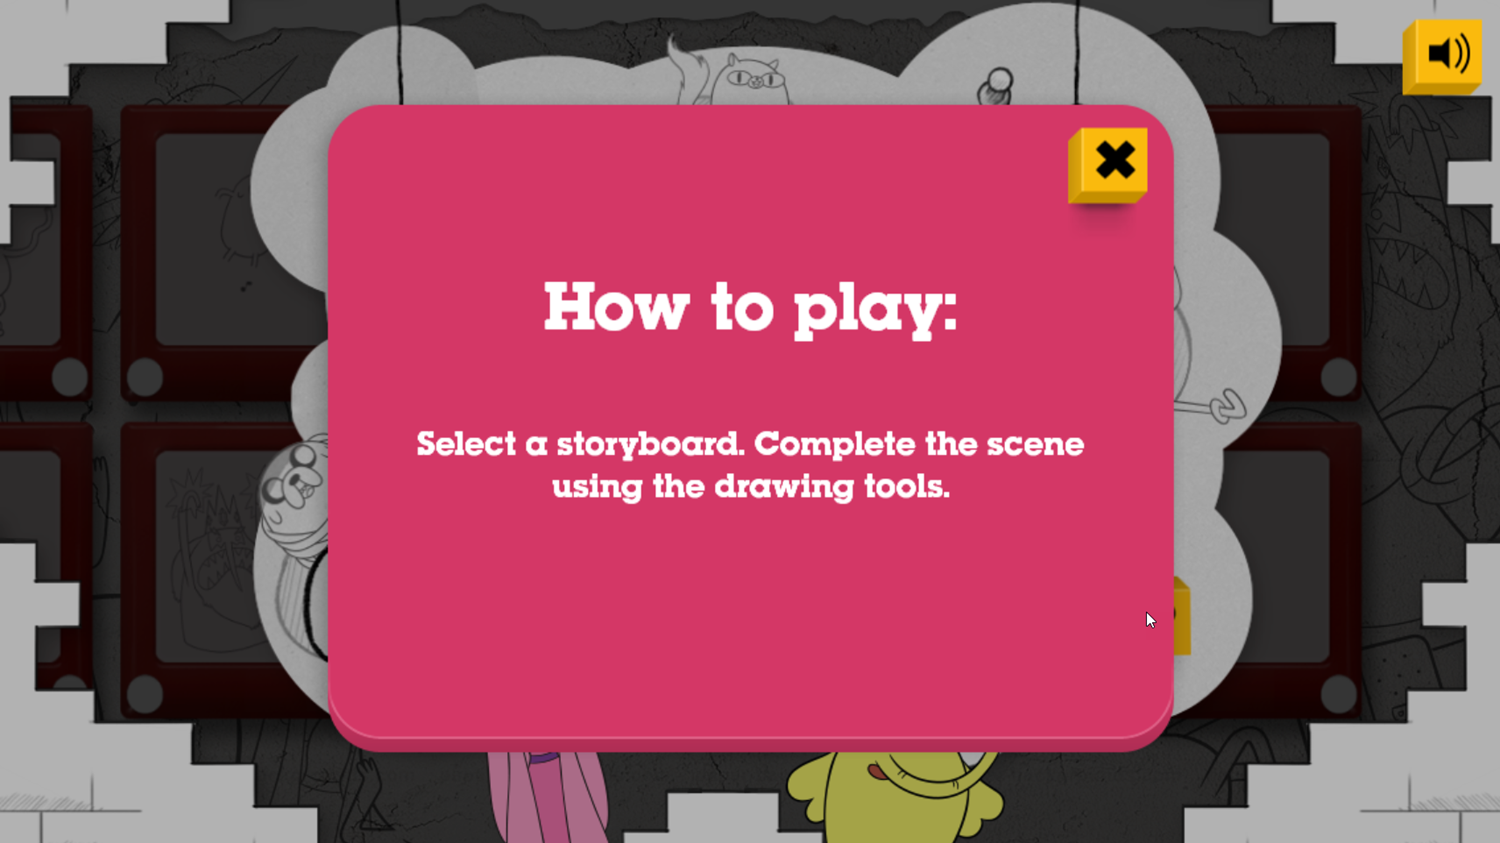 Adventure Time Storyboard Game How To Play Screenshot.